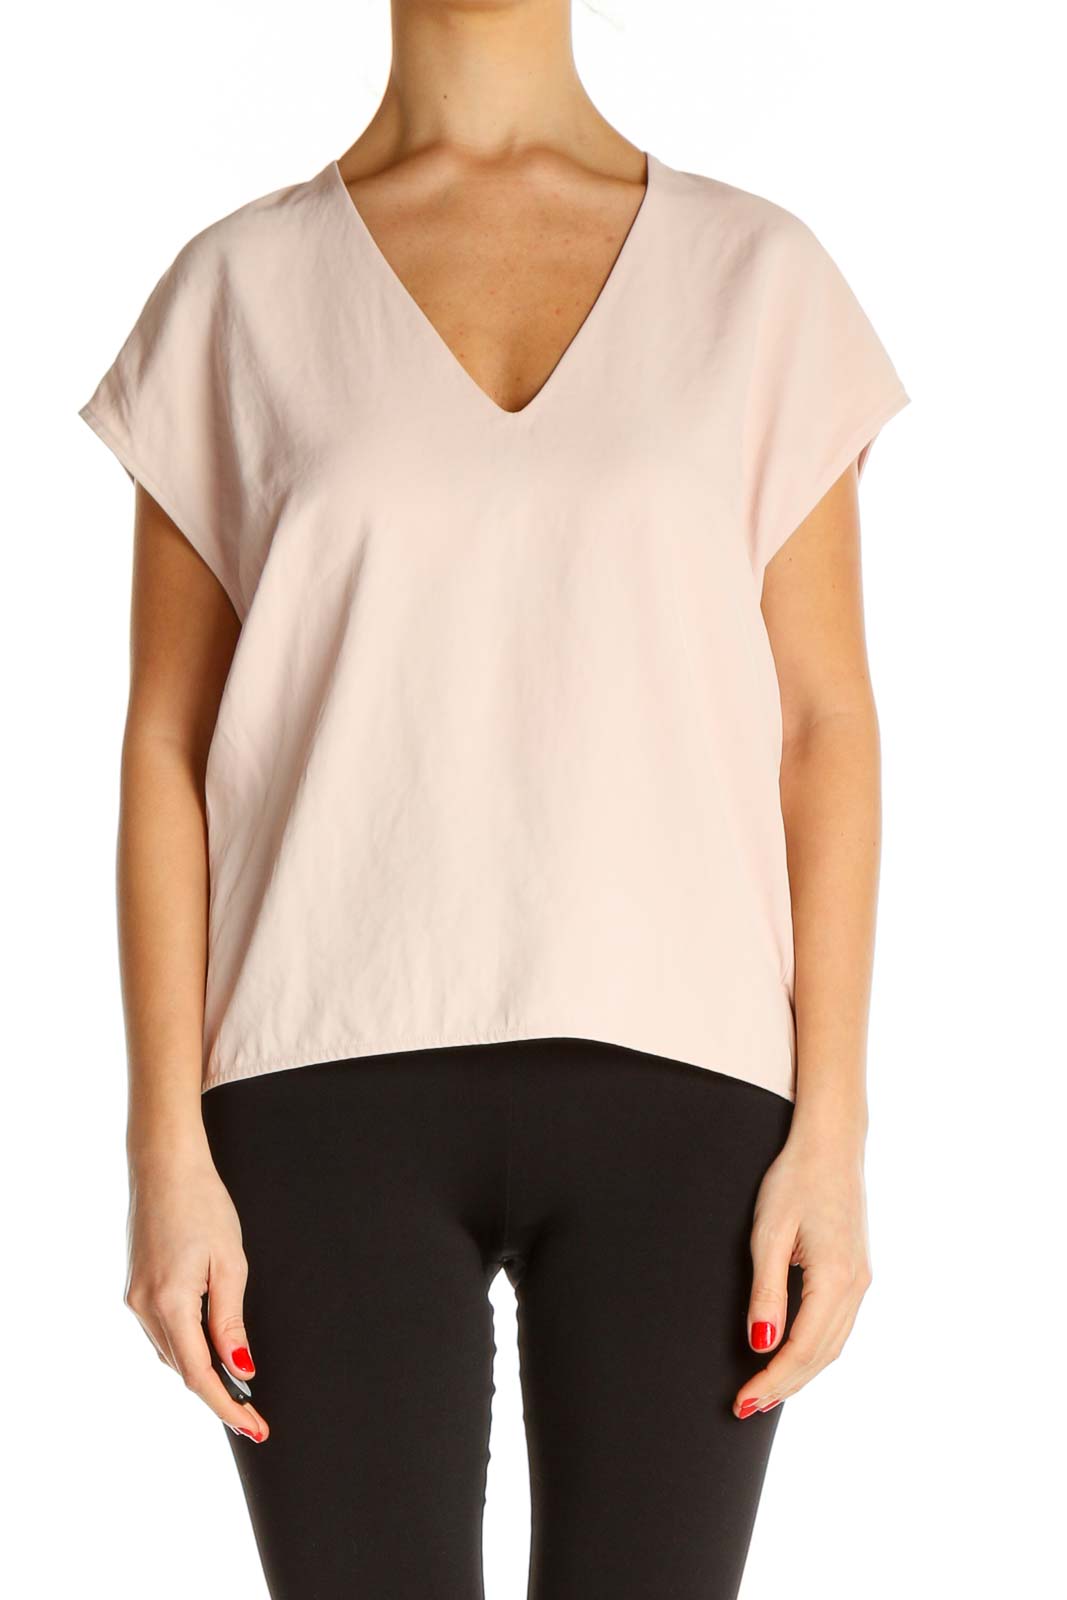 Pink Solid Casual T-Shirt Front